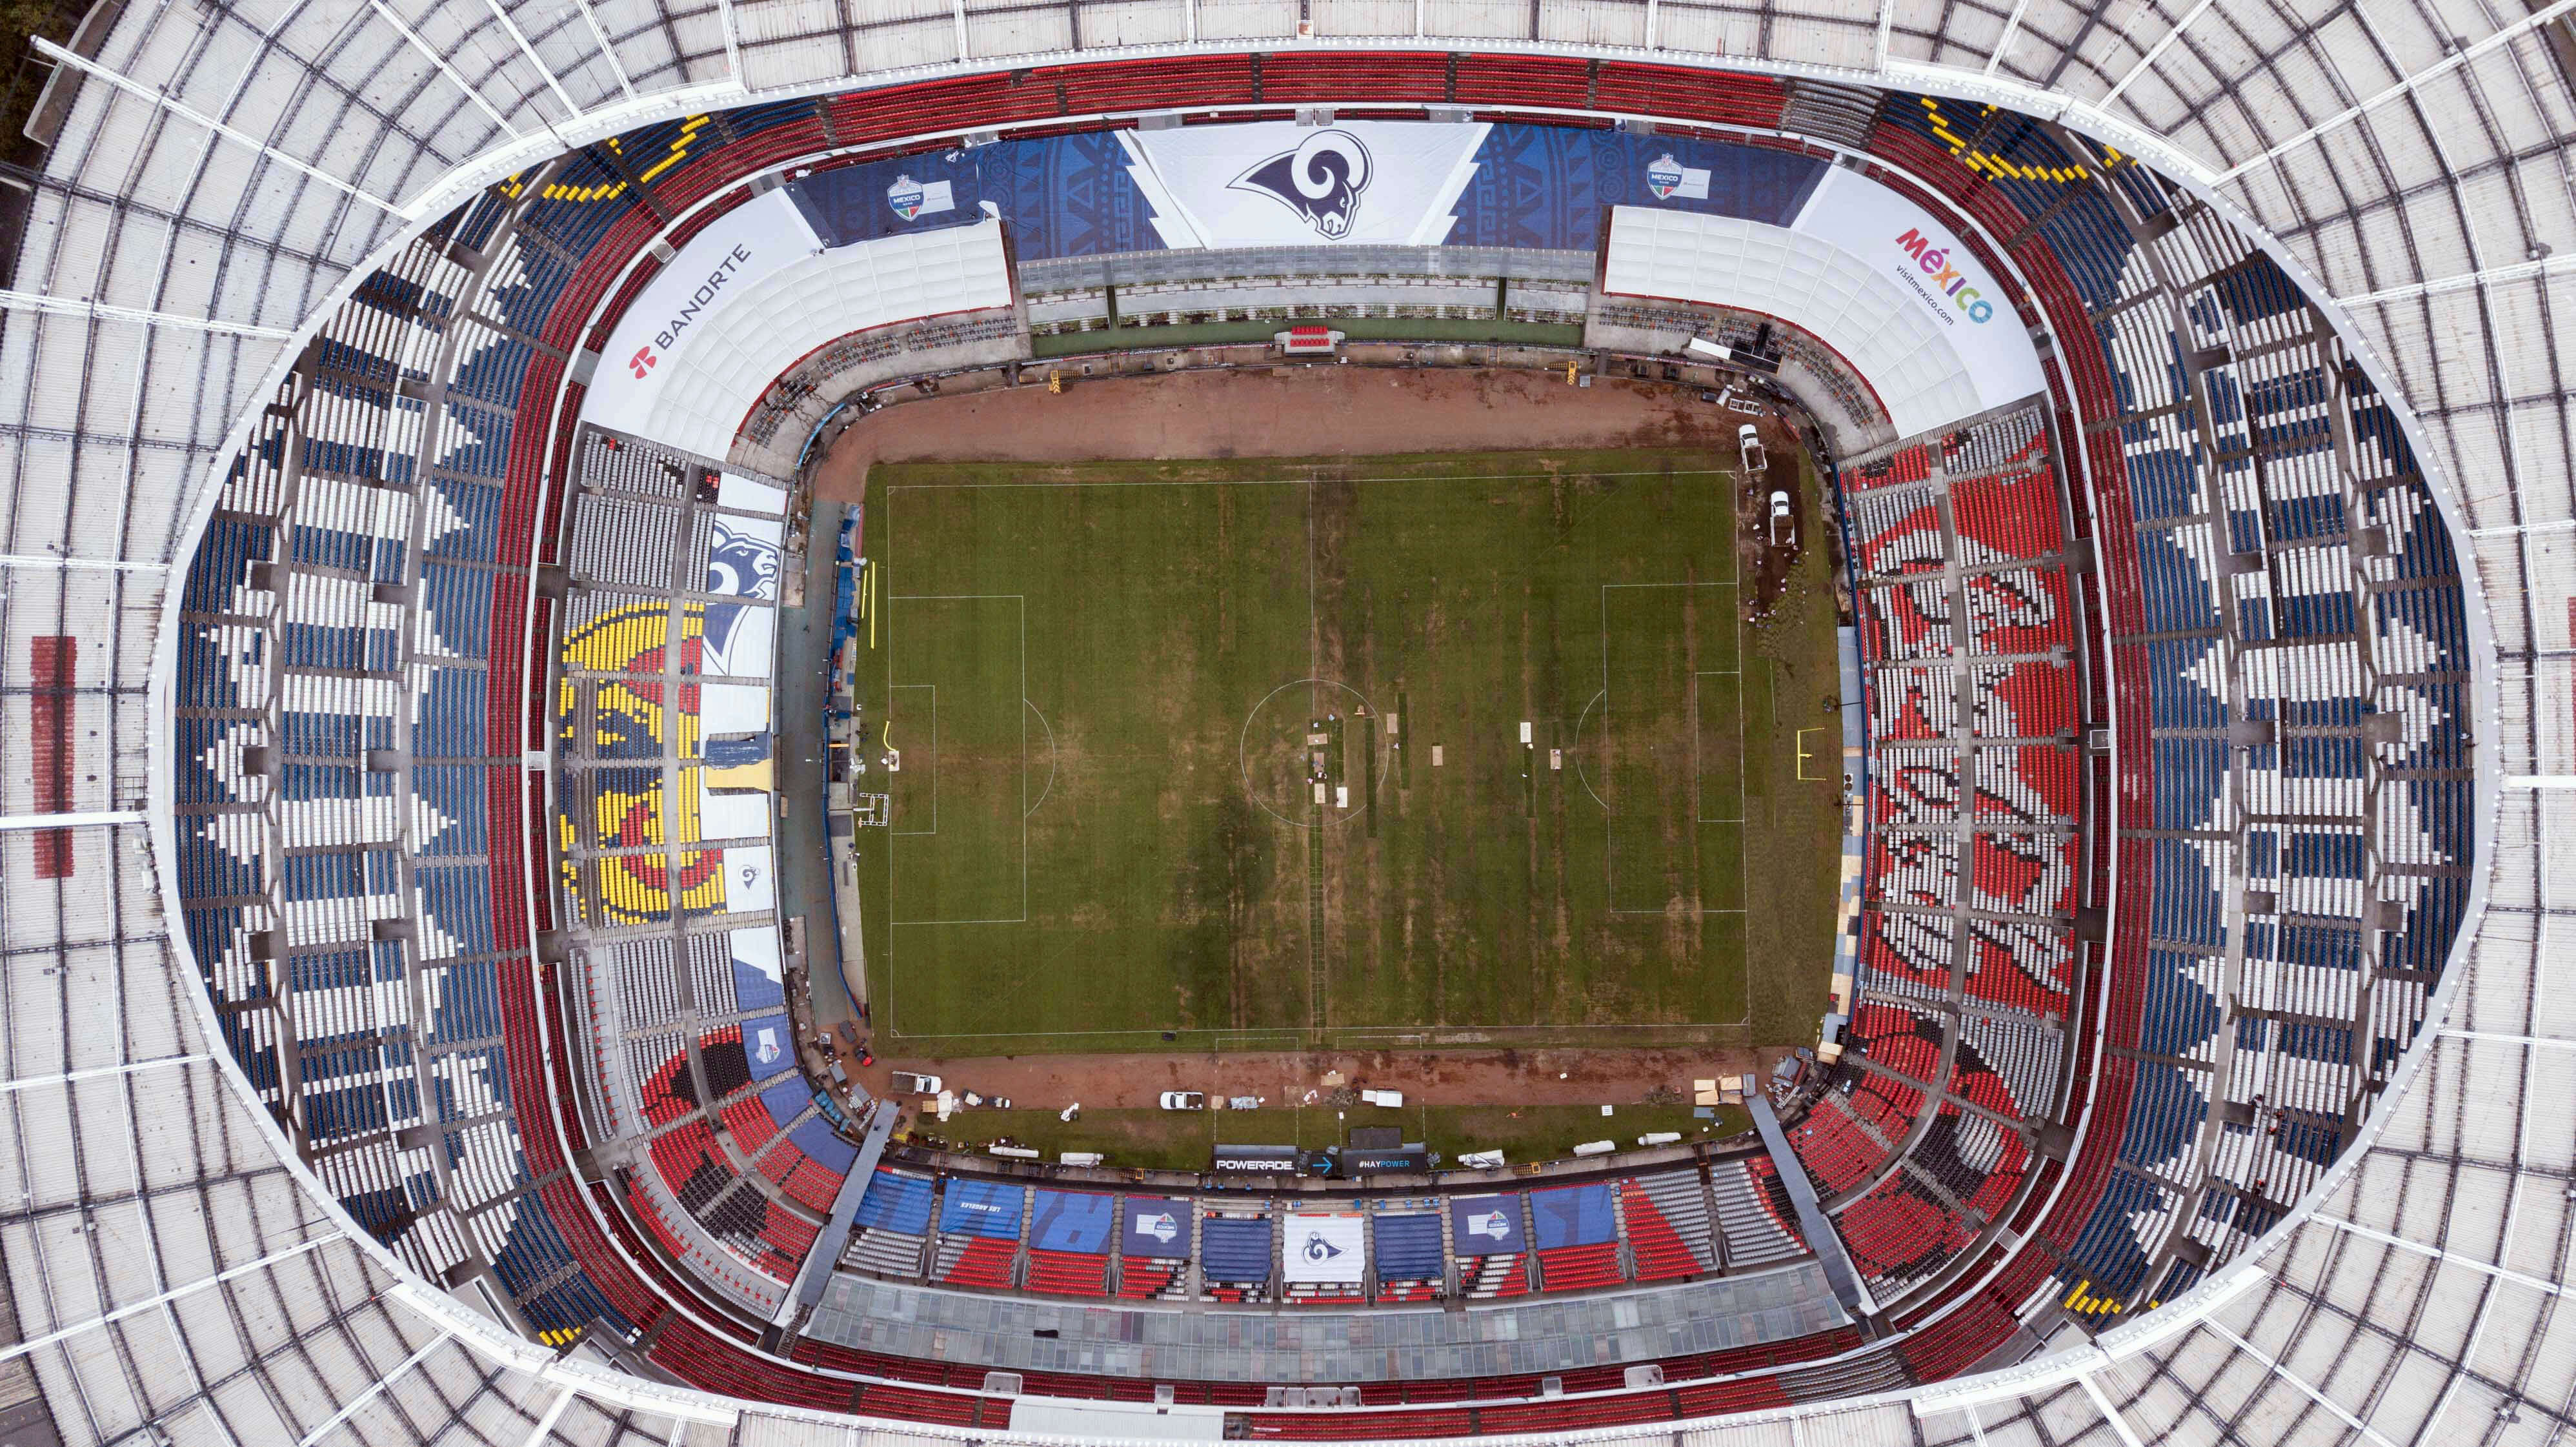 An aerial view of Mexico' City's Azteca Stadium on Tuesday.